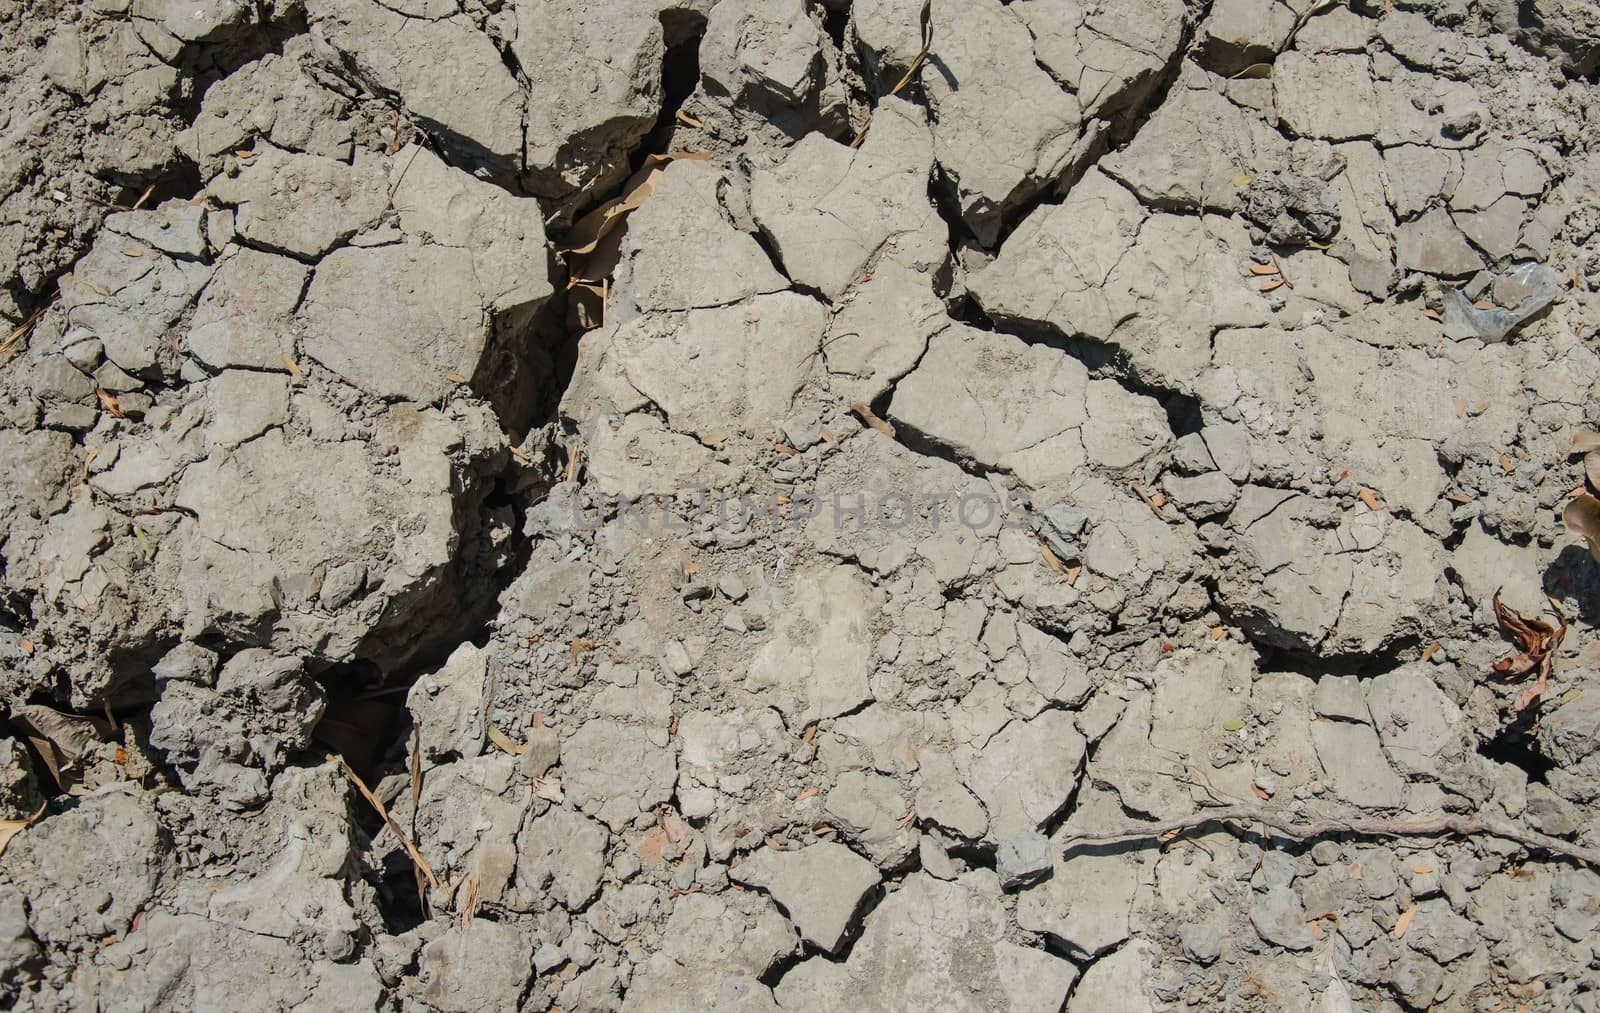 Wide cracks in the dried up ground